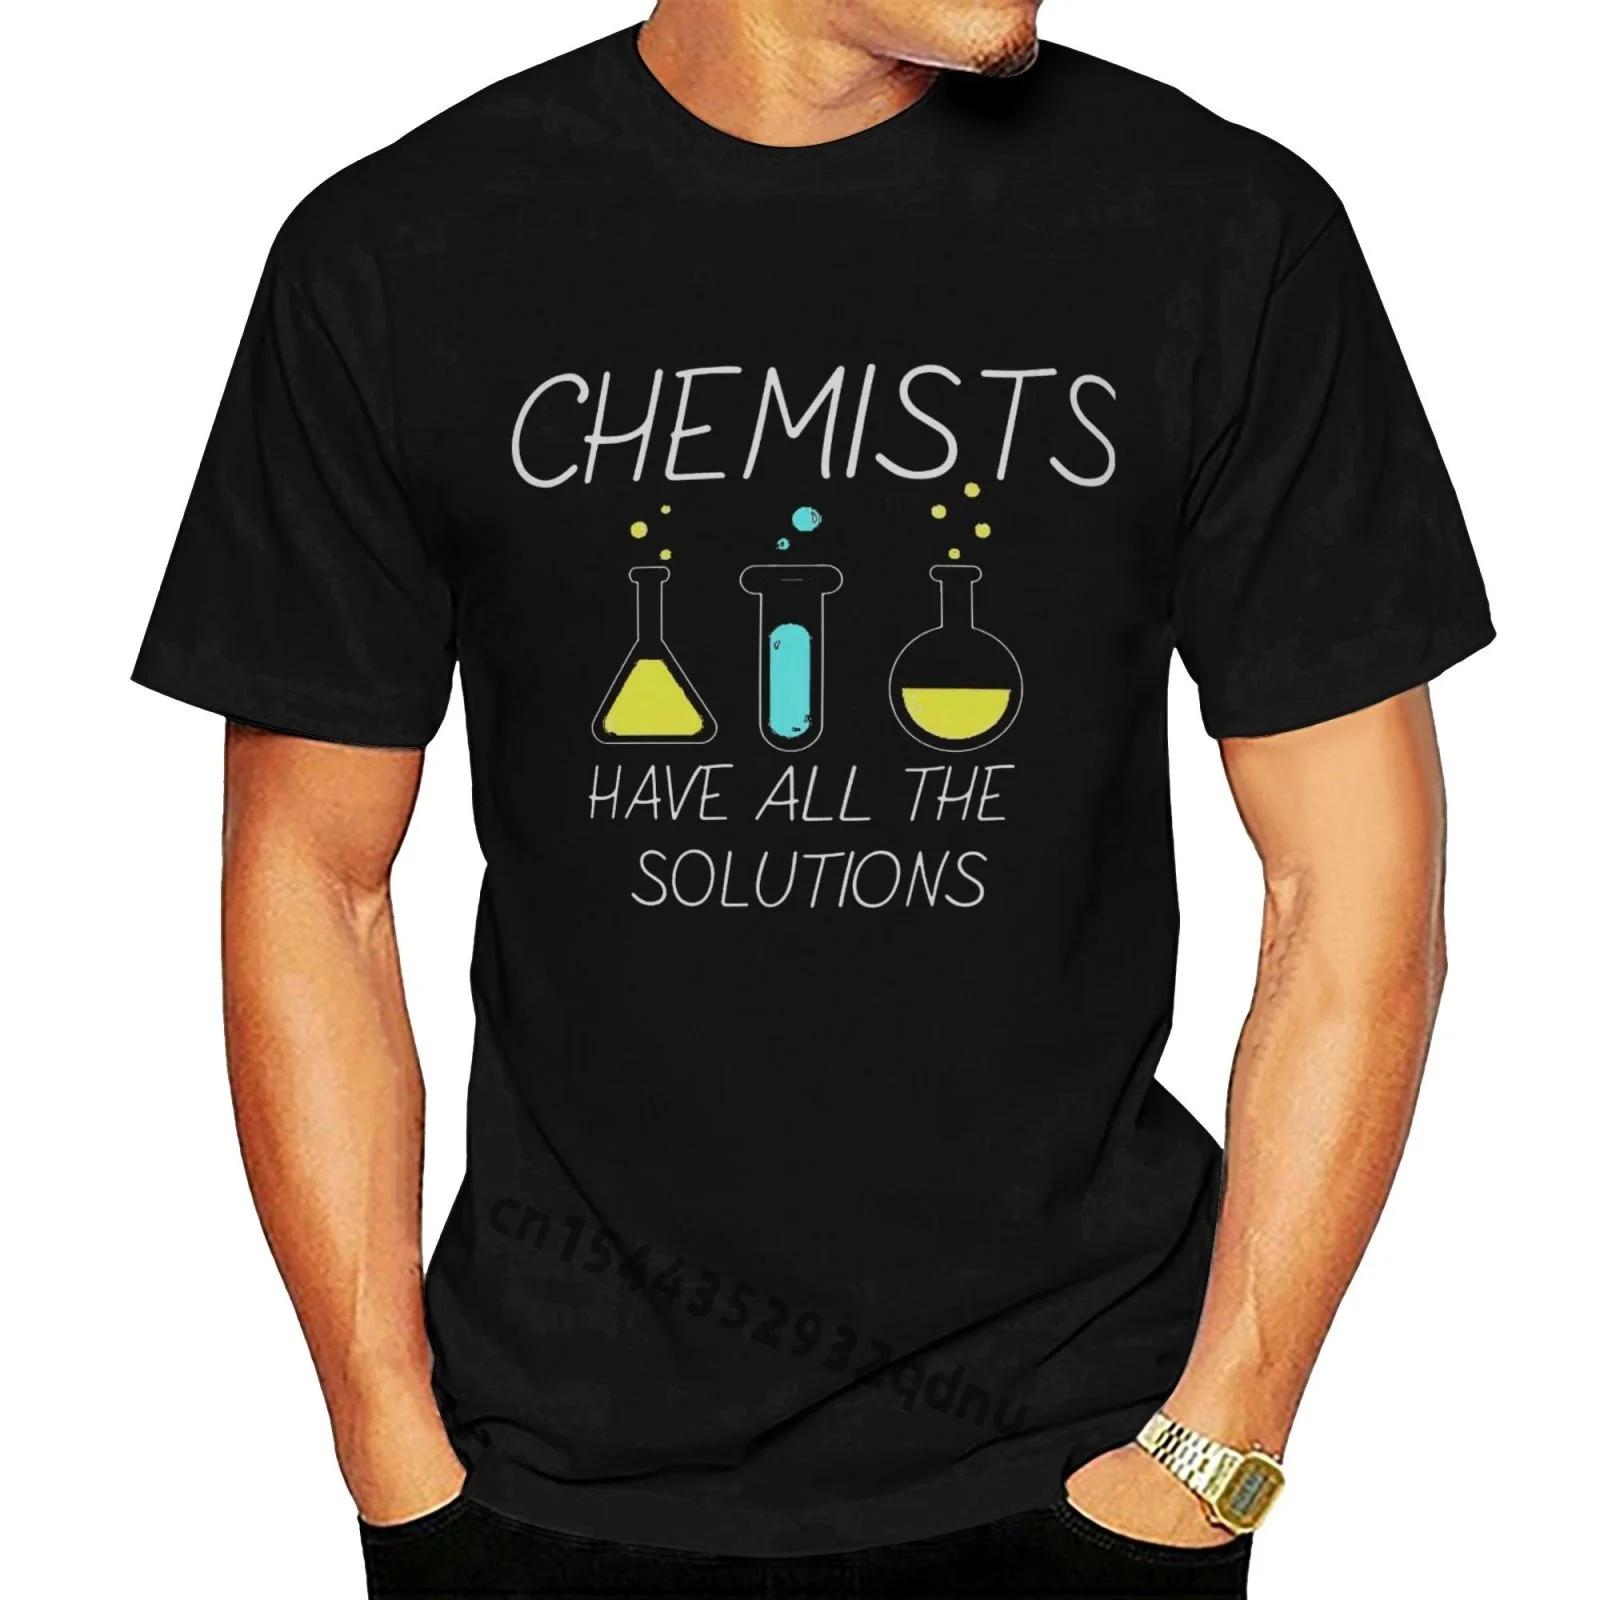 

Chemists Have All Solutions Boy Funny Mashup Black T-Shirt For Youth Middle-Age Old Age Tee Shirt